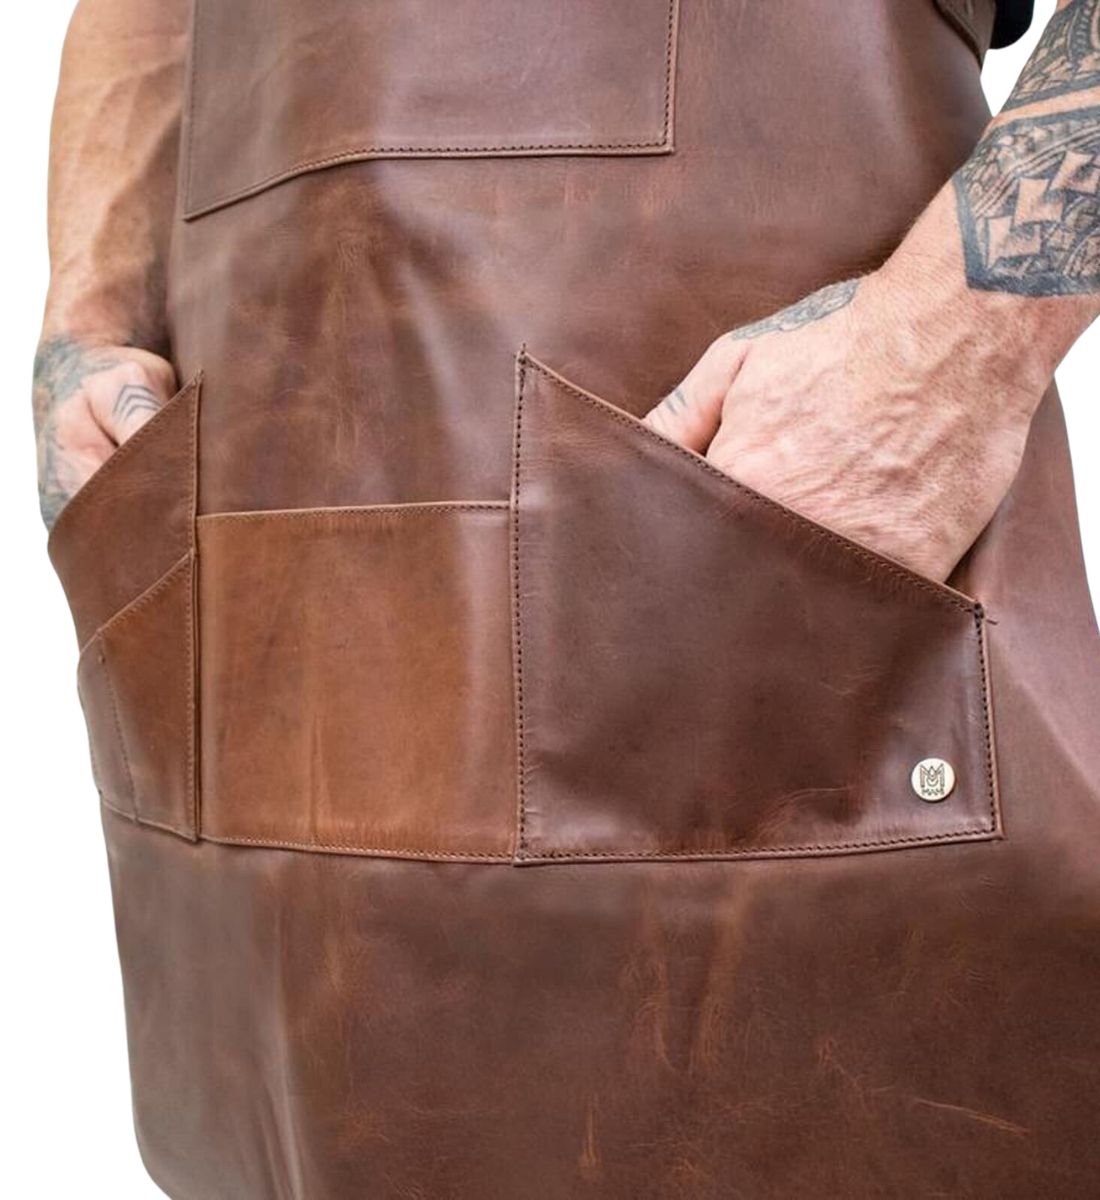 Craftsman's Utility Apron with Pockets